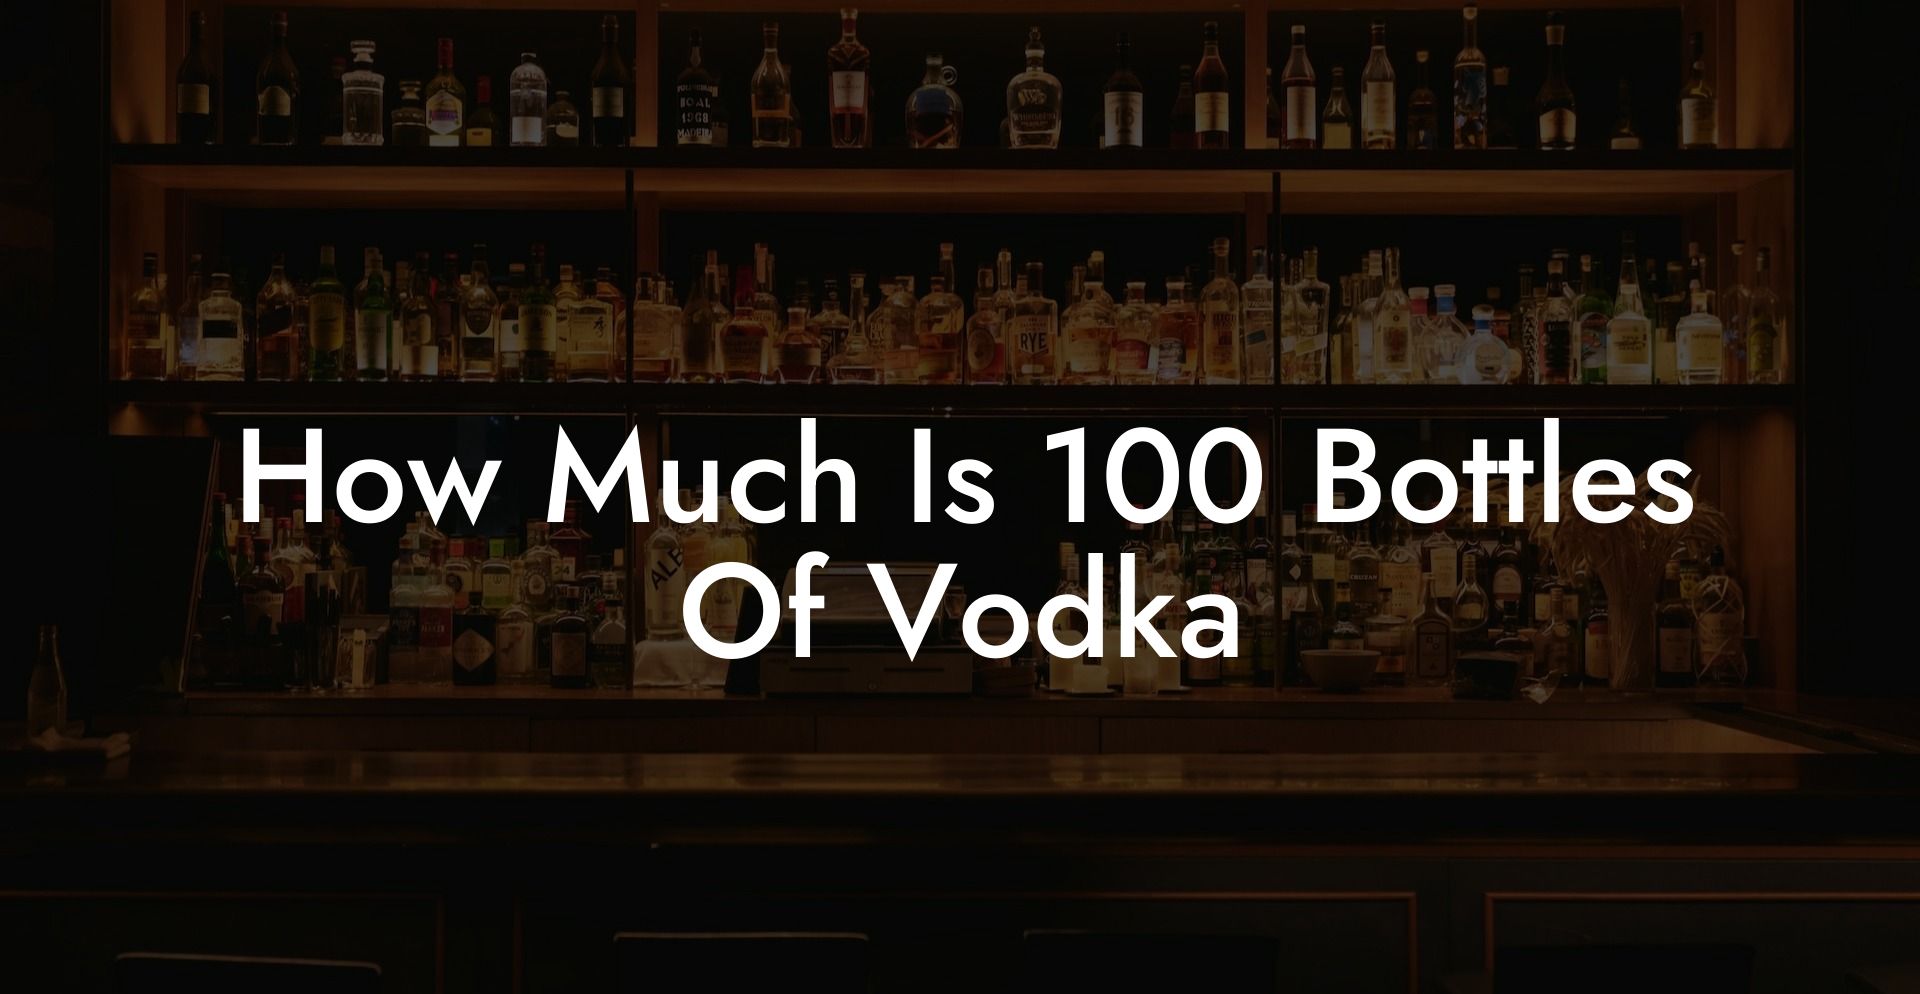 How Much Is 100 Bottles Of Vodka